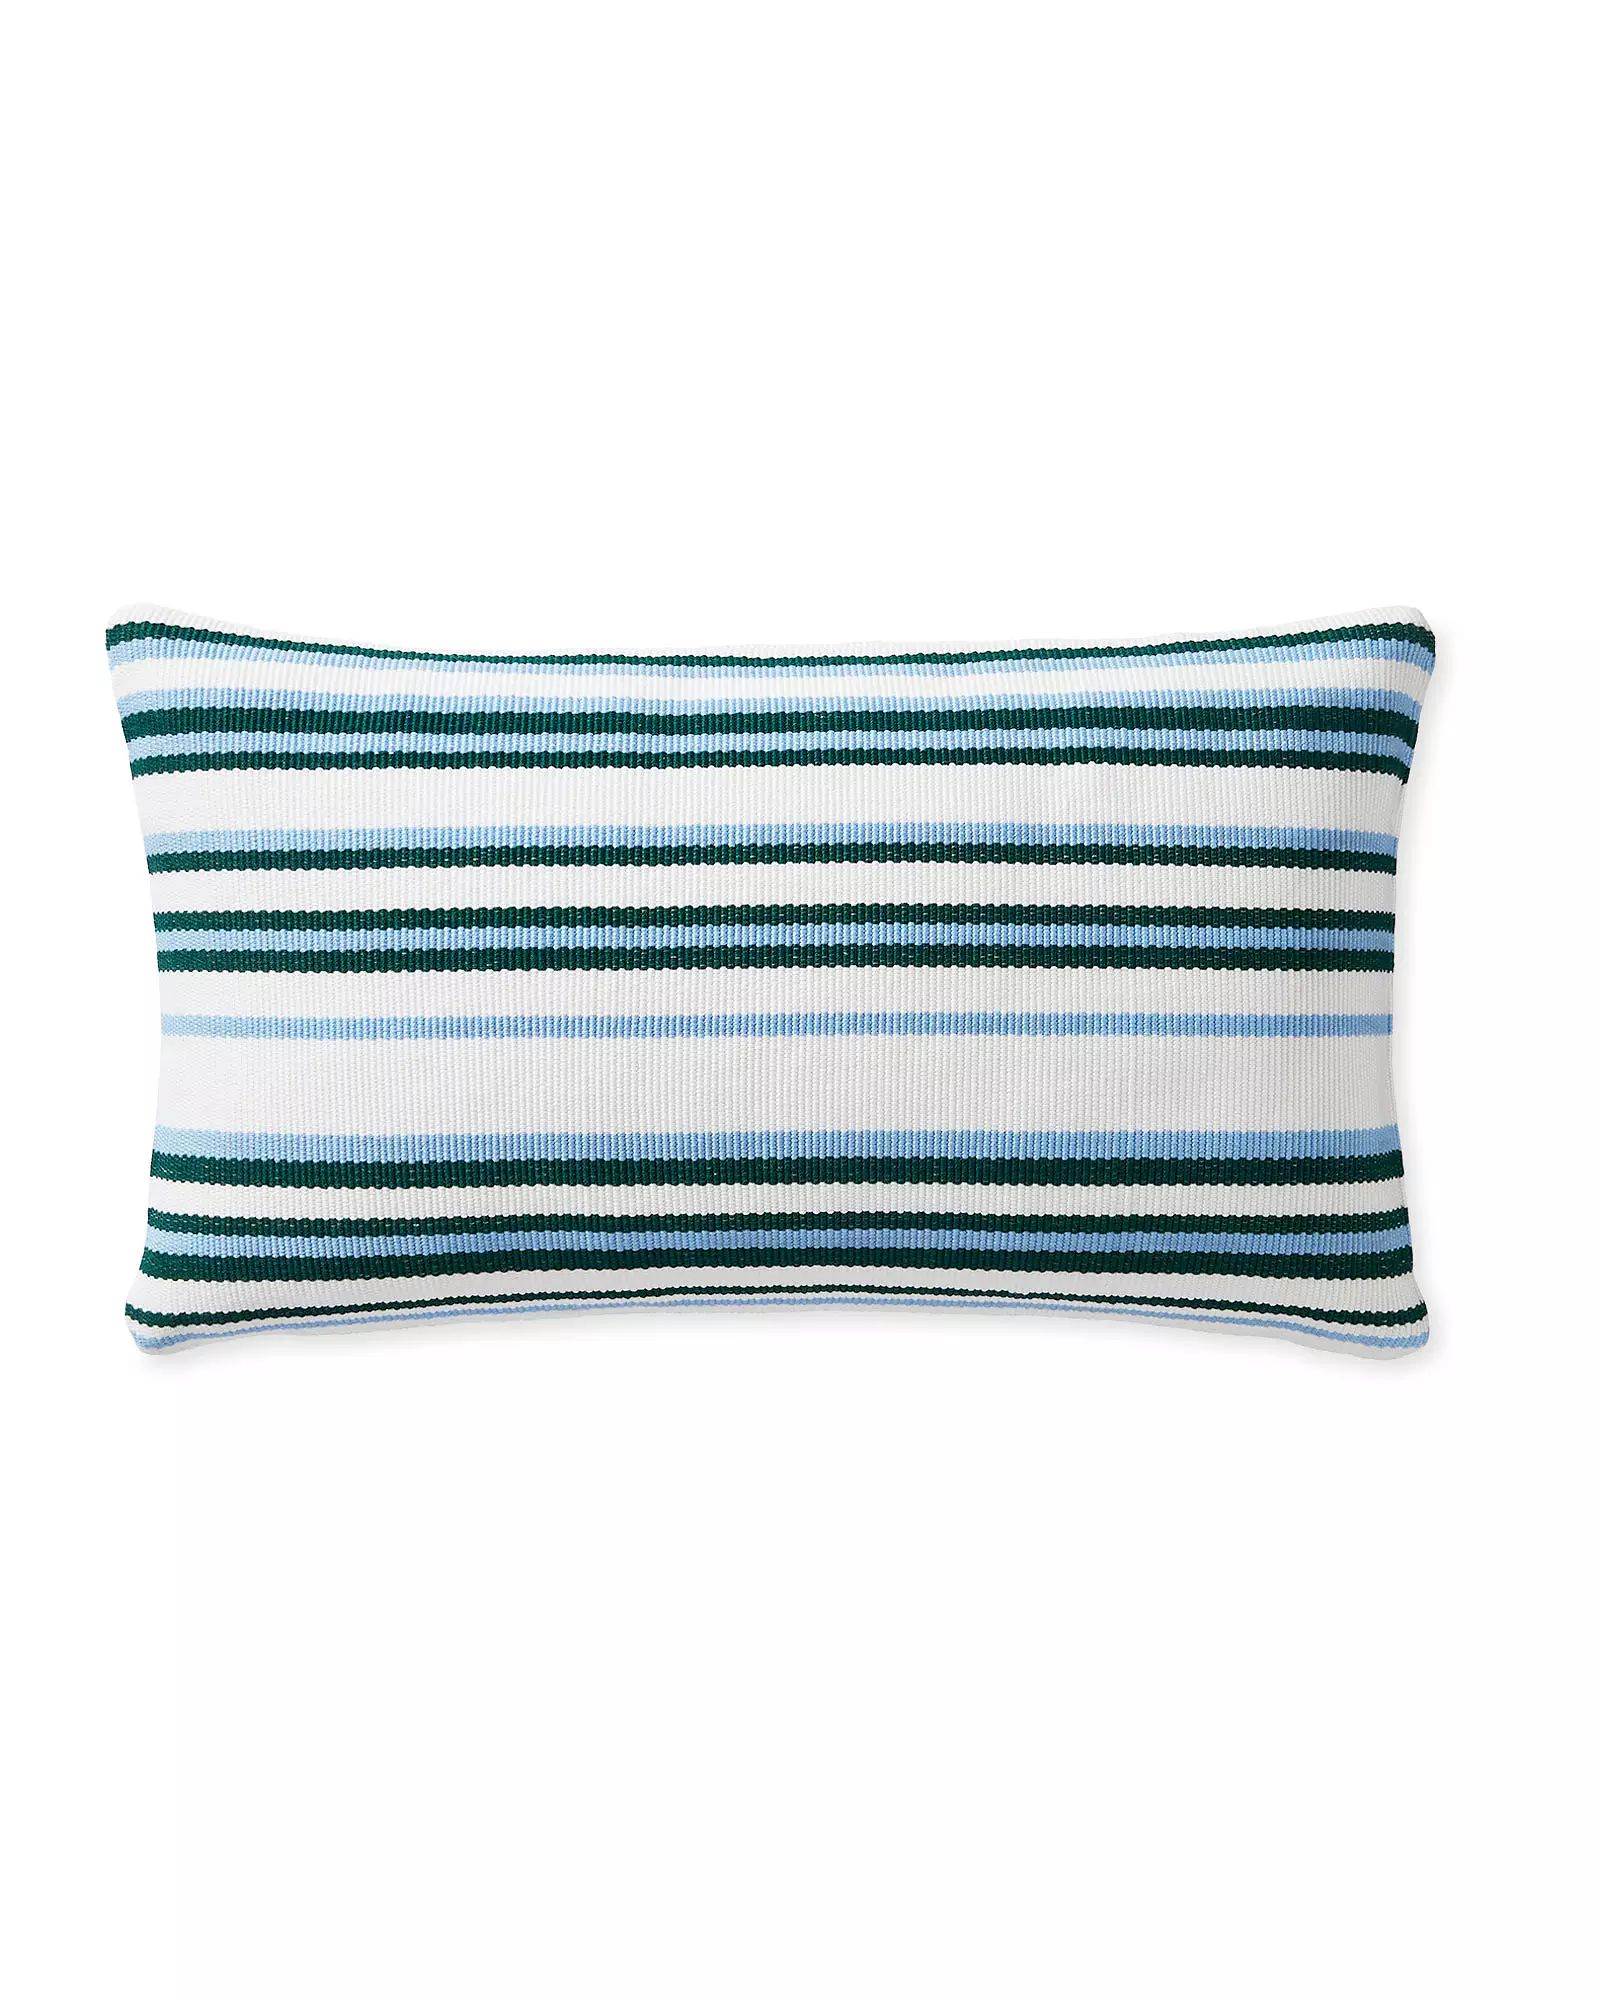 Coastline Pillow | Serena and Lily